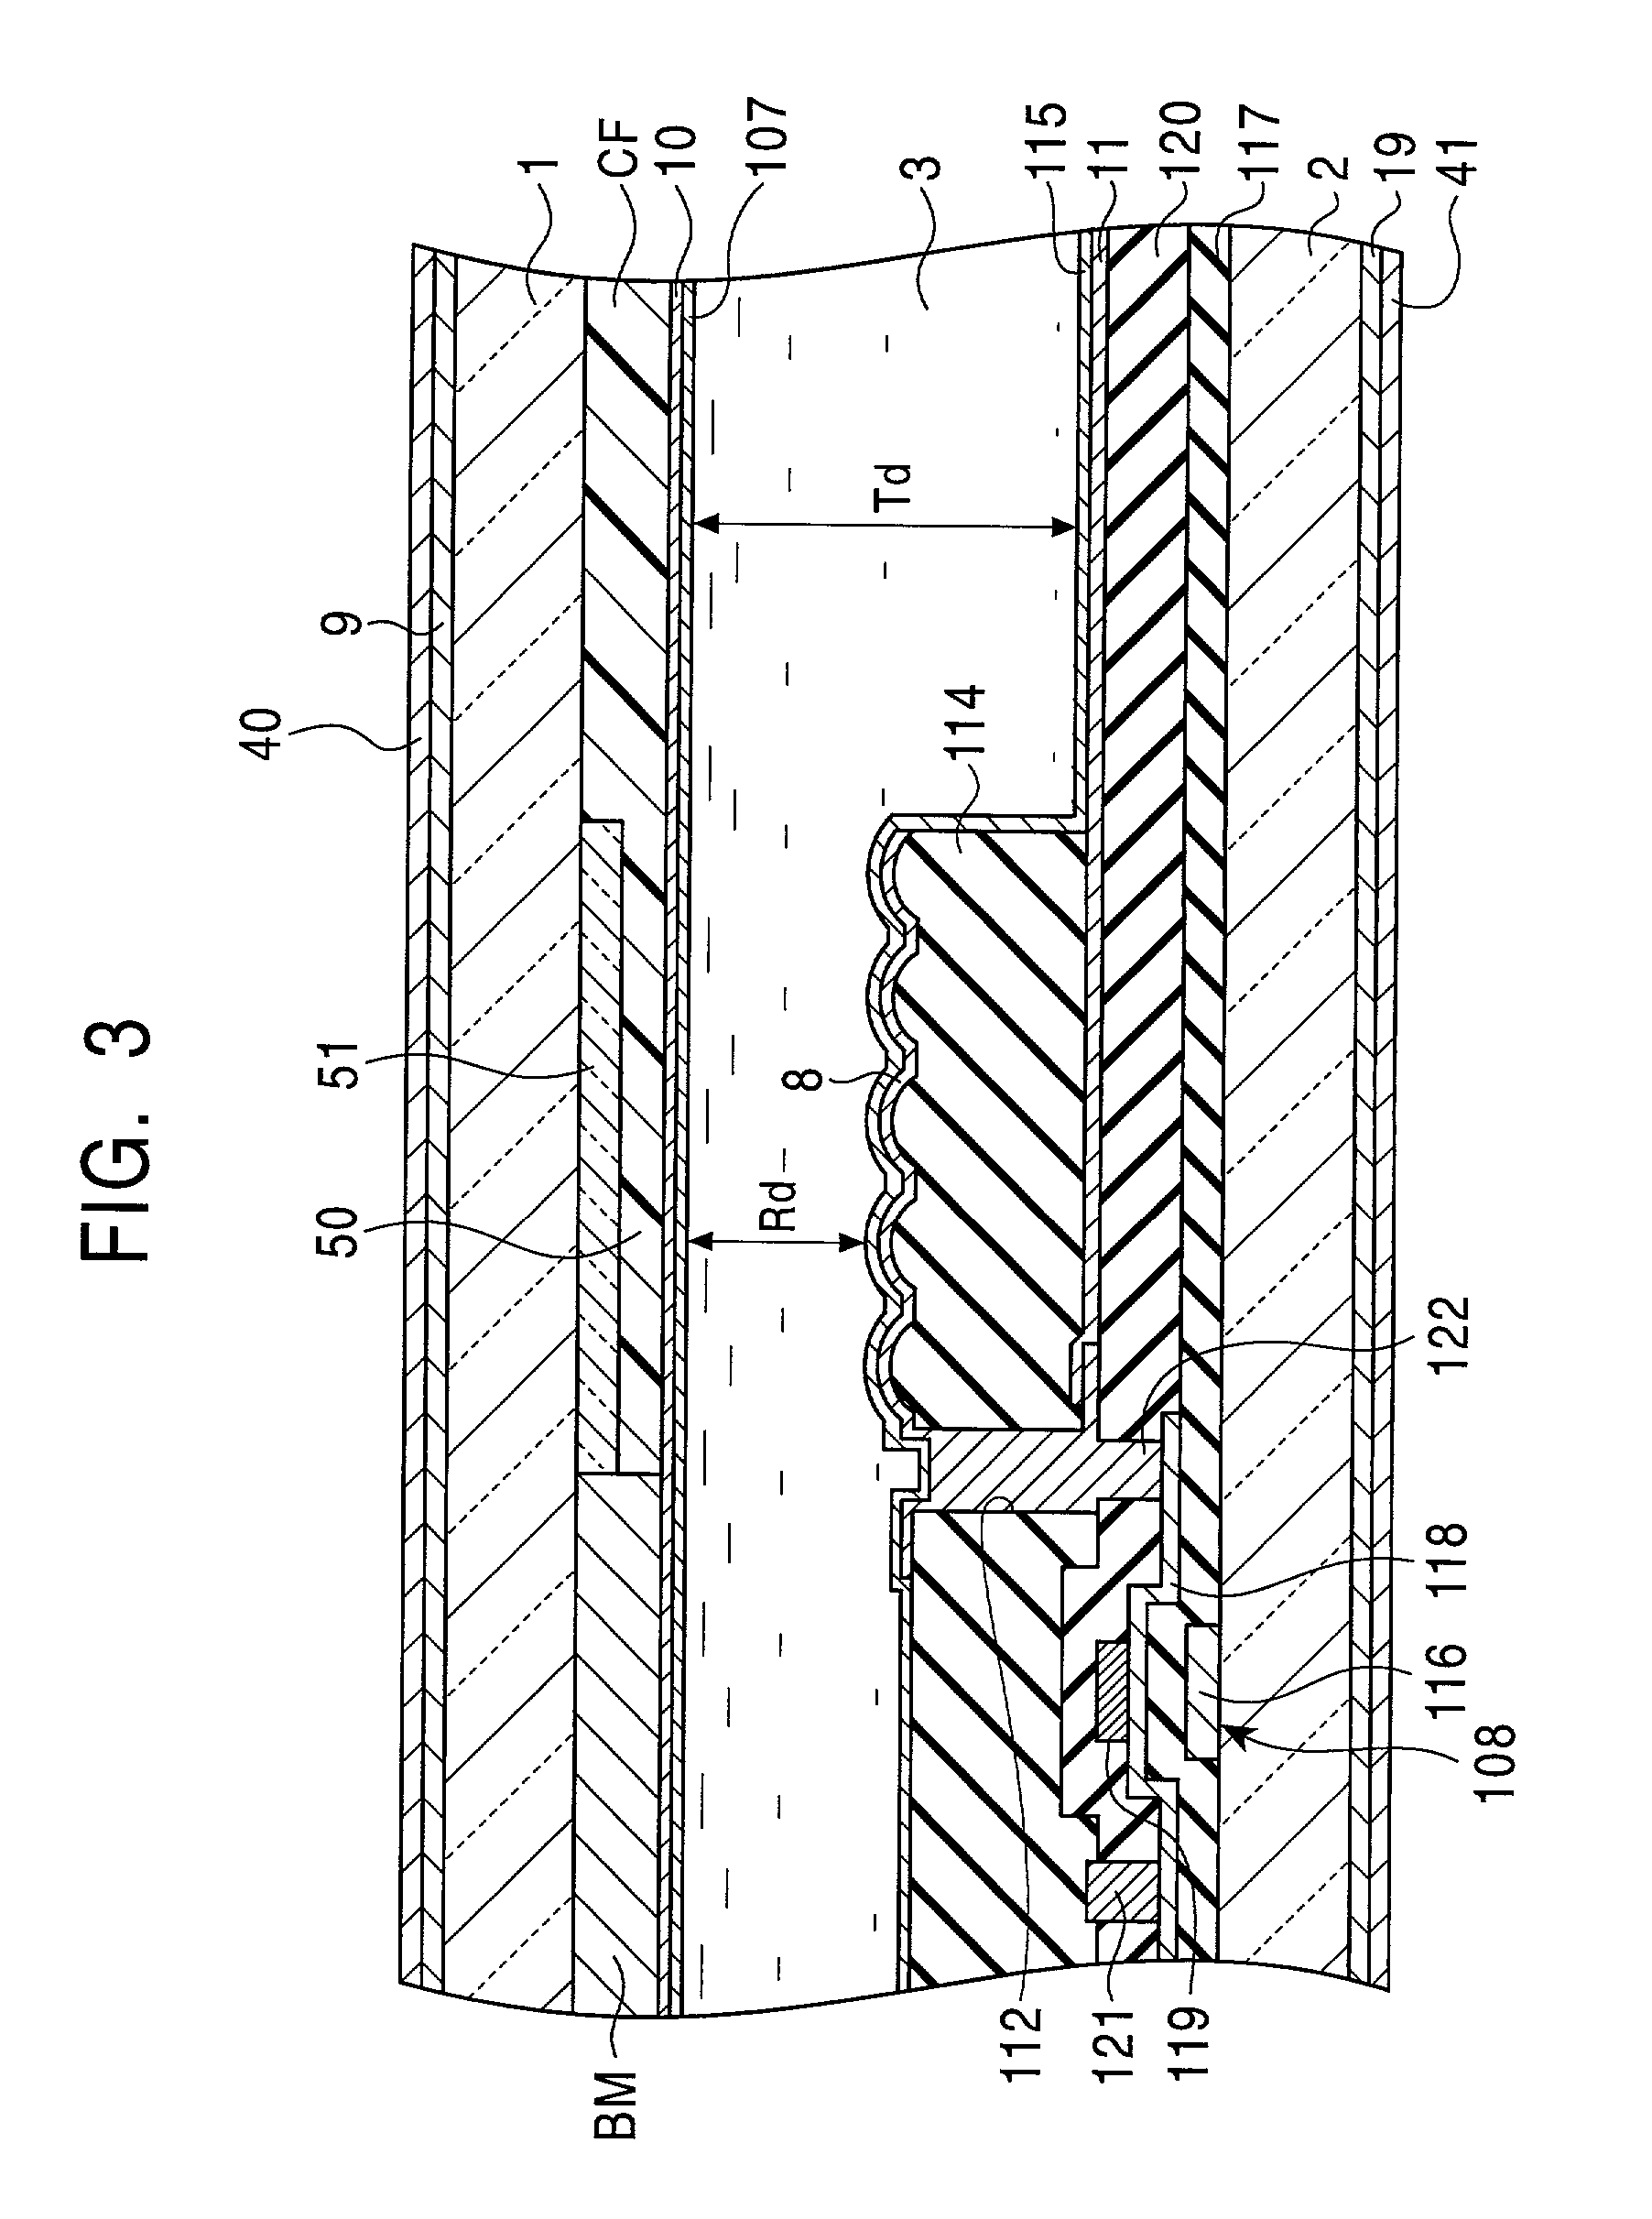 Display apparatus, a method of manufacturing the same and a color filter